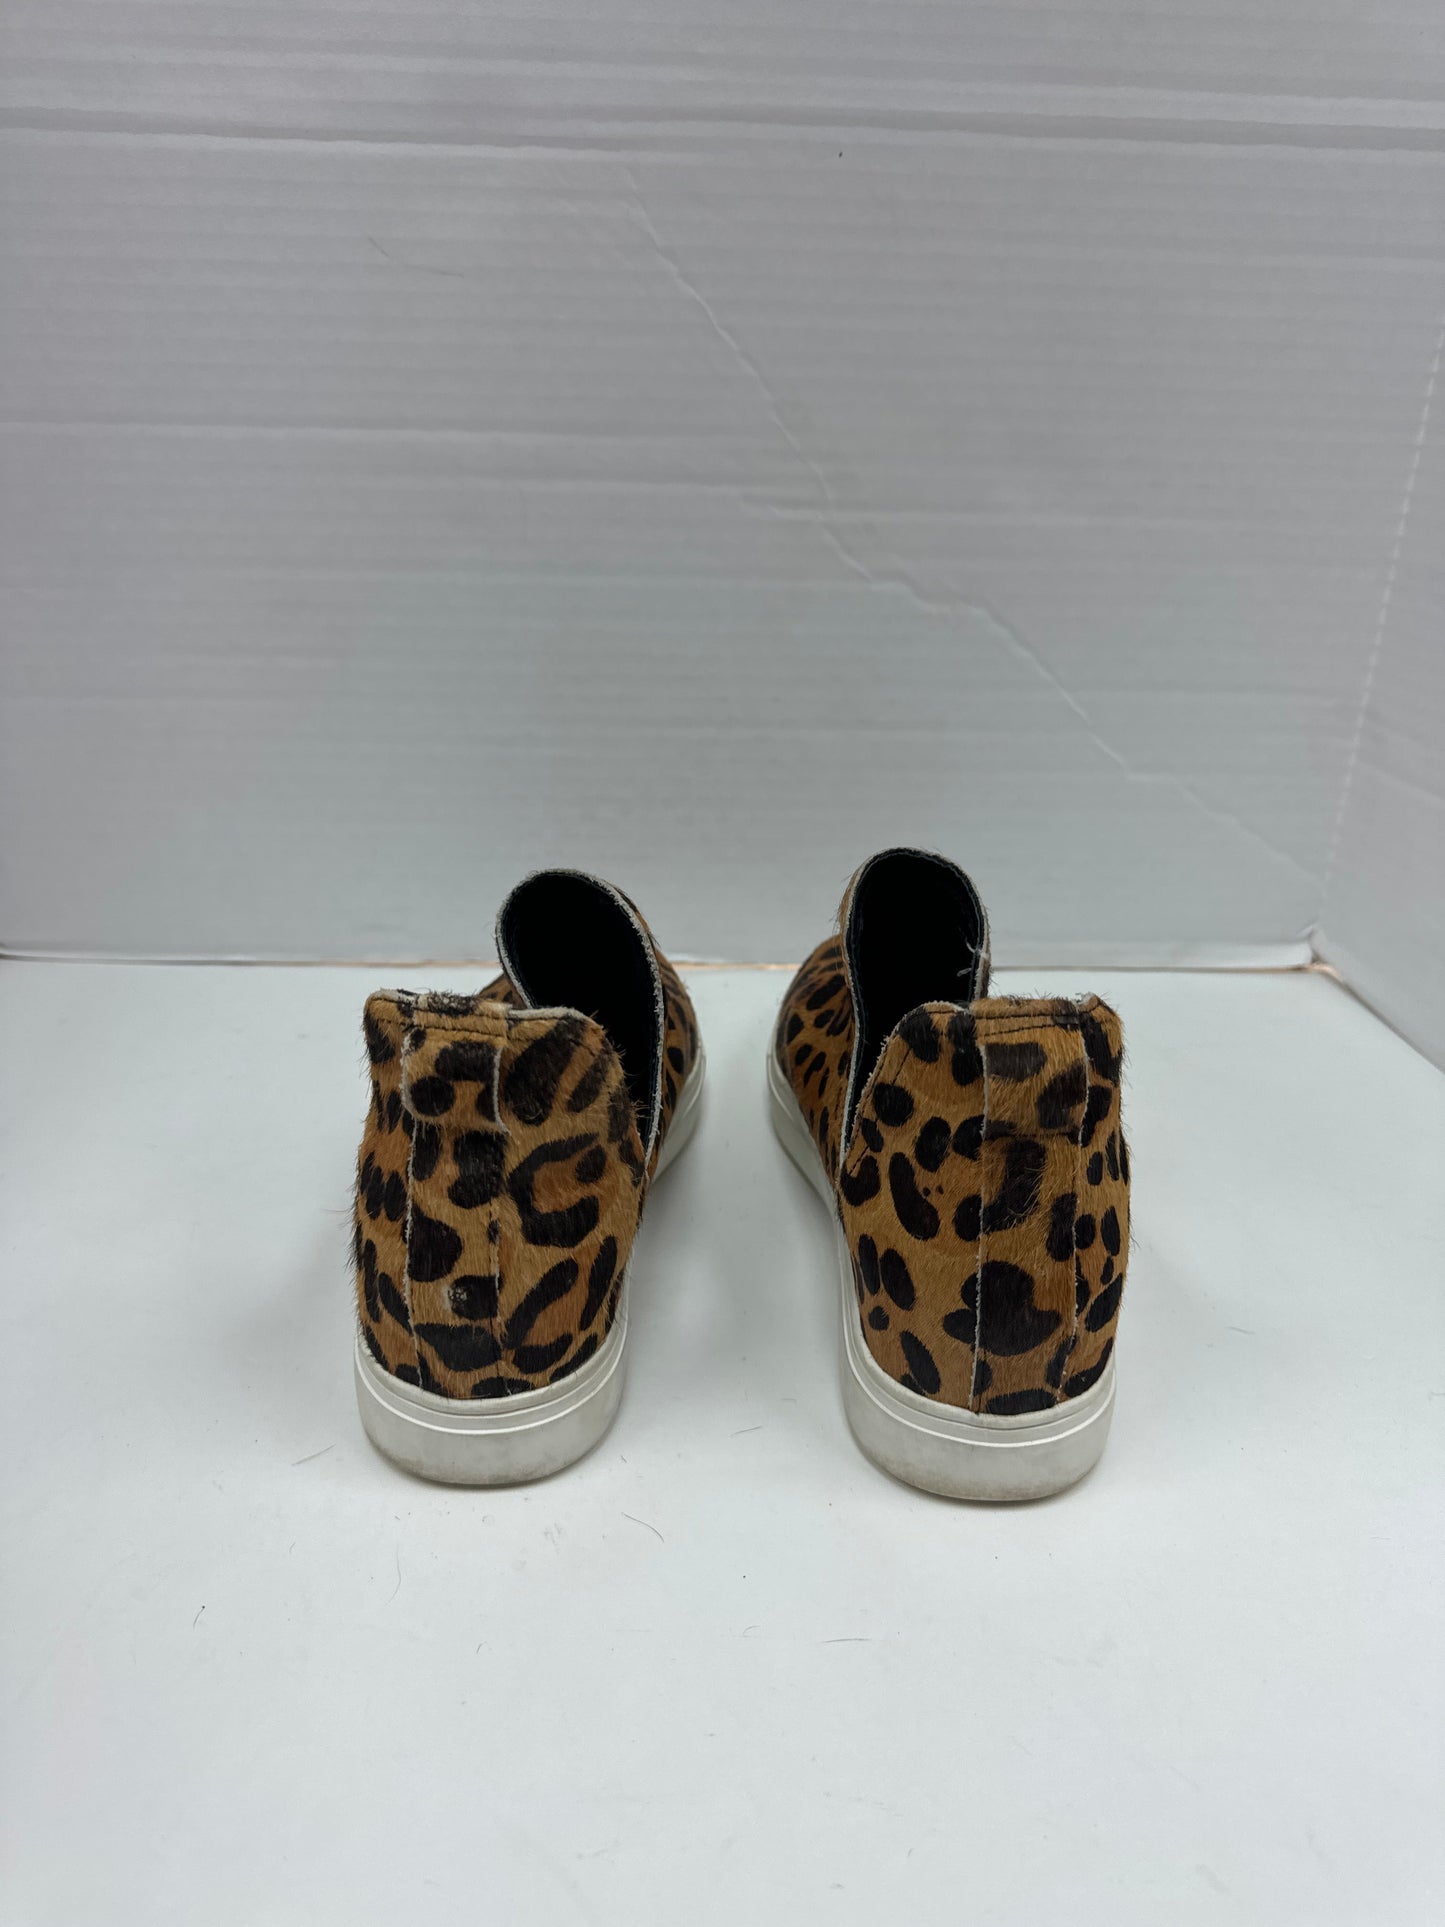 Shoes Sneakers By Steve Madden  Size: 7